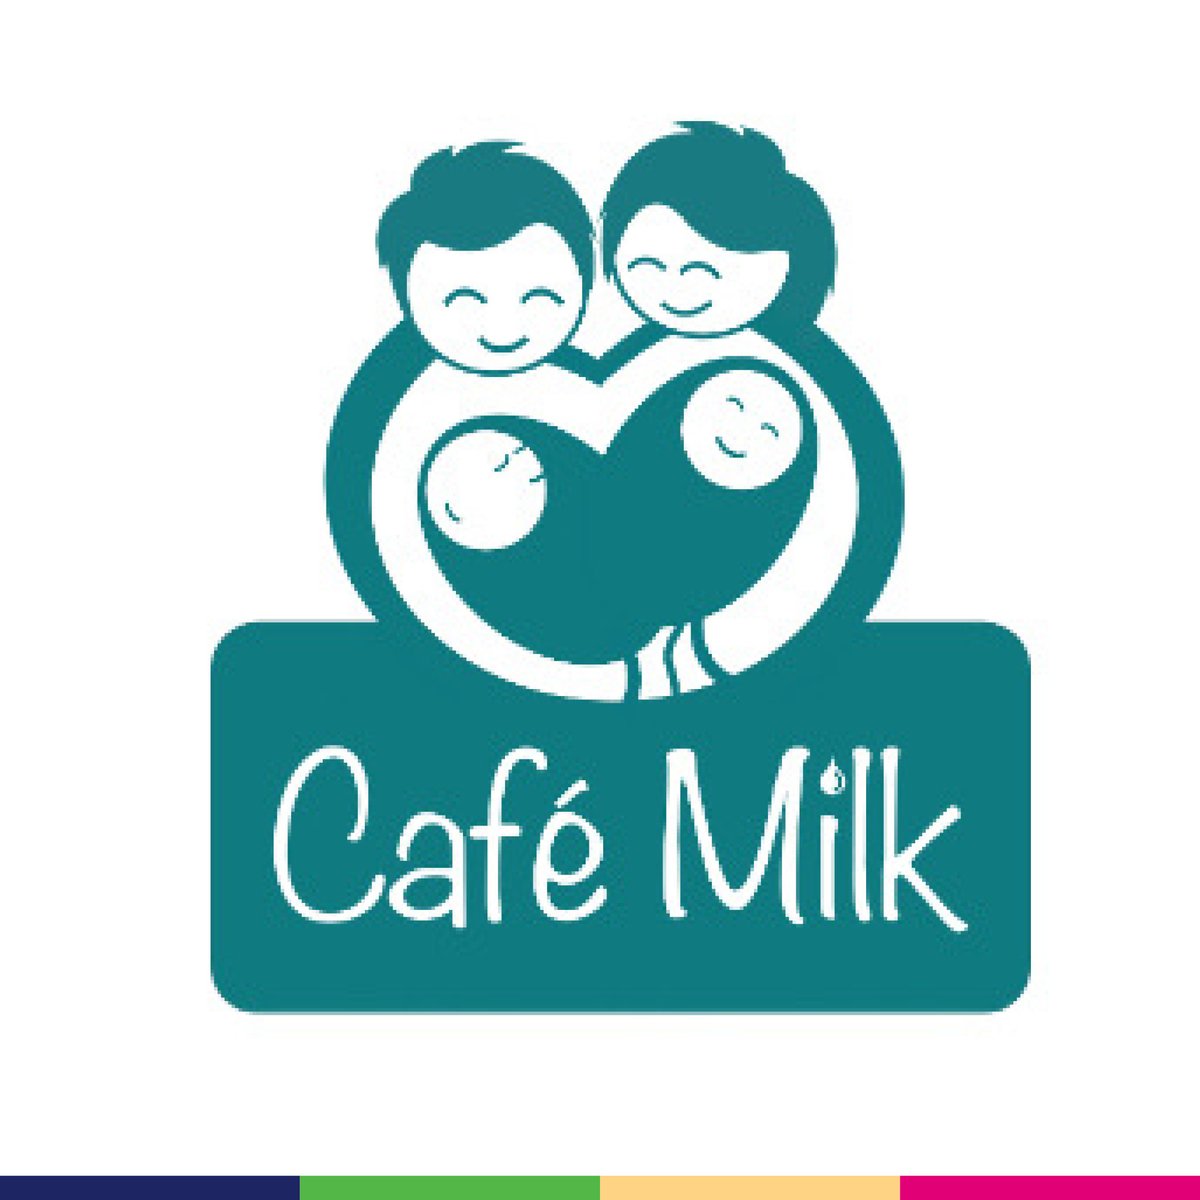 🤰🏻 Are you a new Mum or a Mum-to-be?
 Join Cafe Milk for friendly advice and support on Wednesdays between 10am-12pm at the Harlequin Pop Up on the Upper Level of The Belfry on:
17th & 24th April & 
1st, 8th, 15th & 22nd May.
#Redhill #MumToBe #NewMum #HarlequinPopUp #SurreyBaby